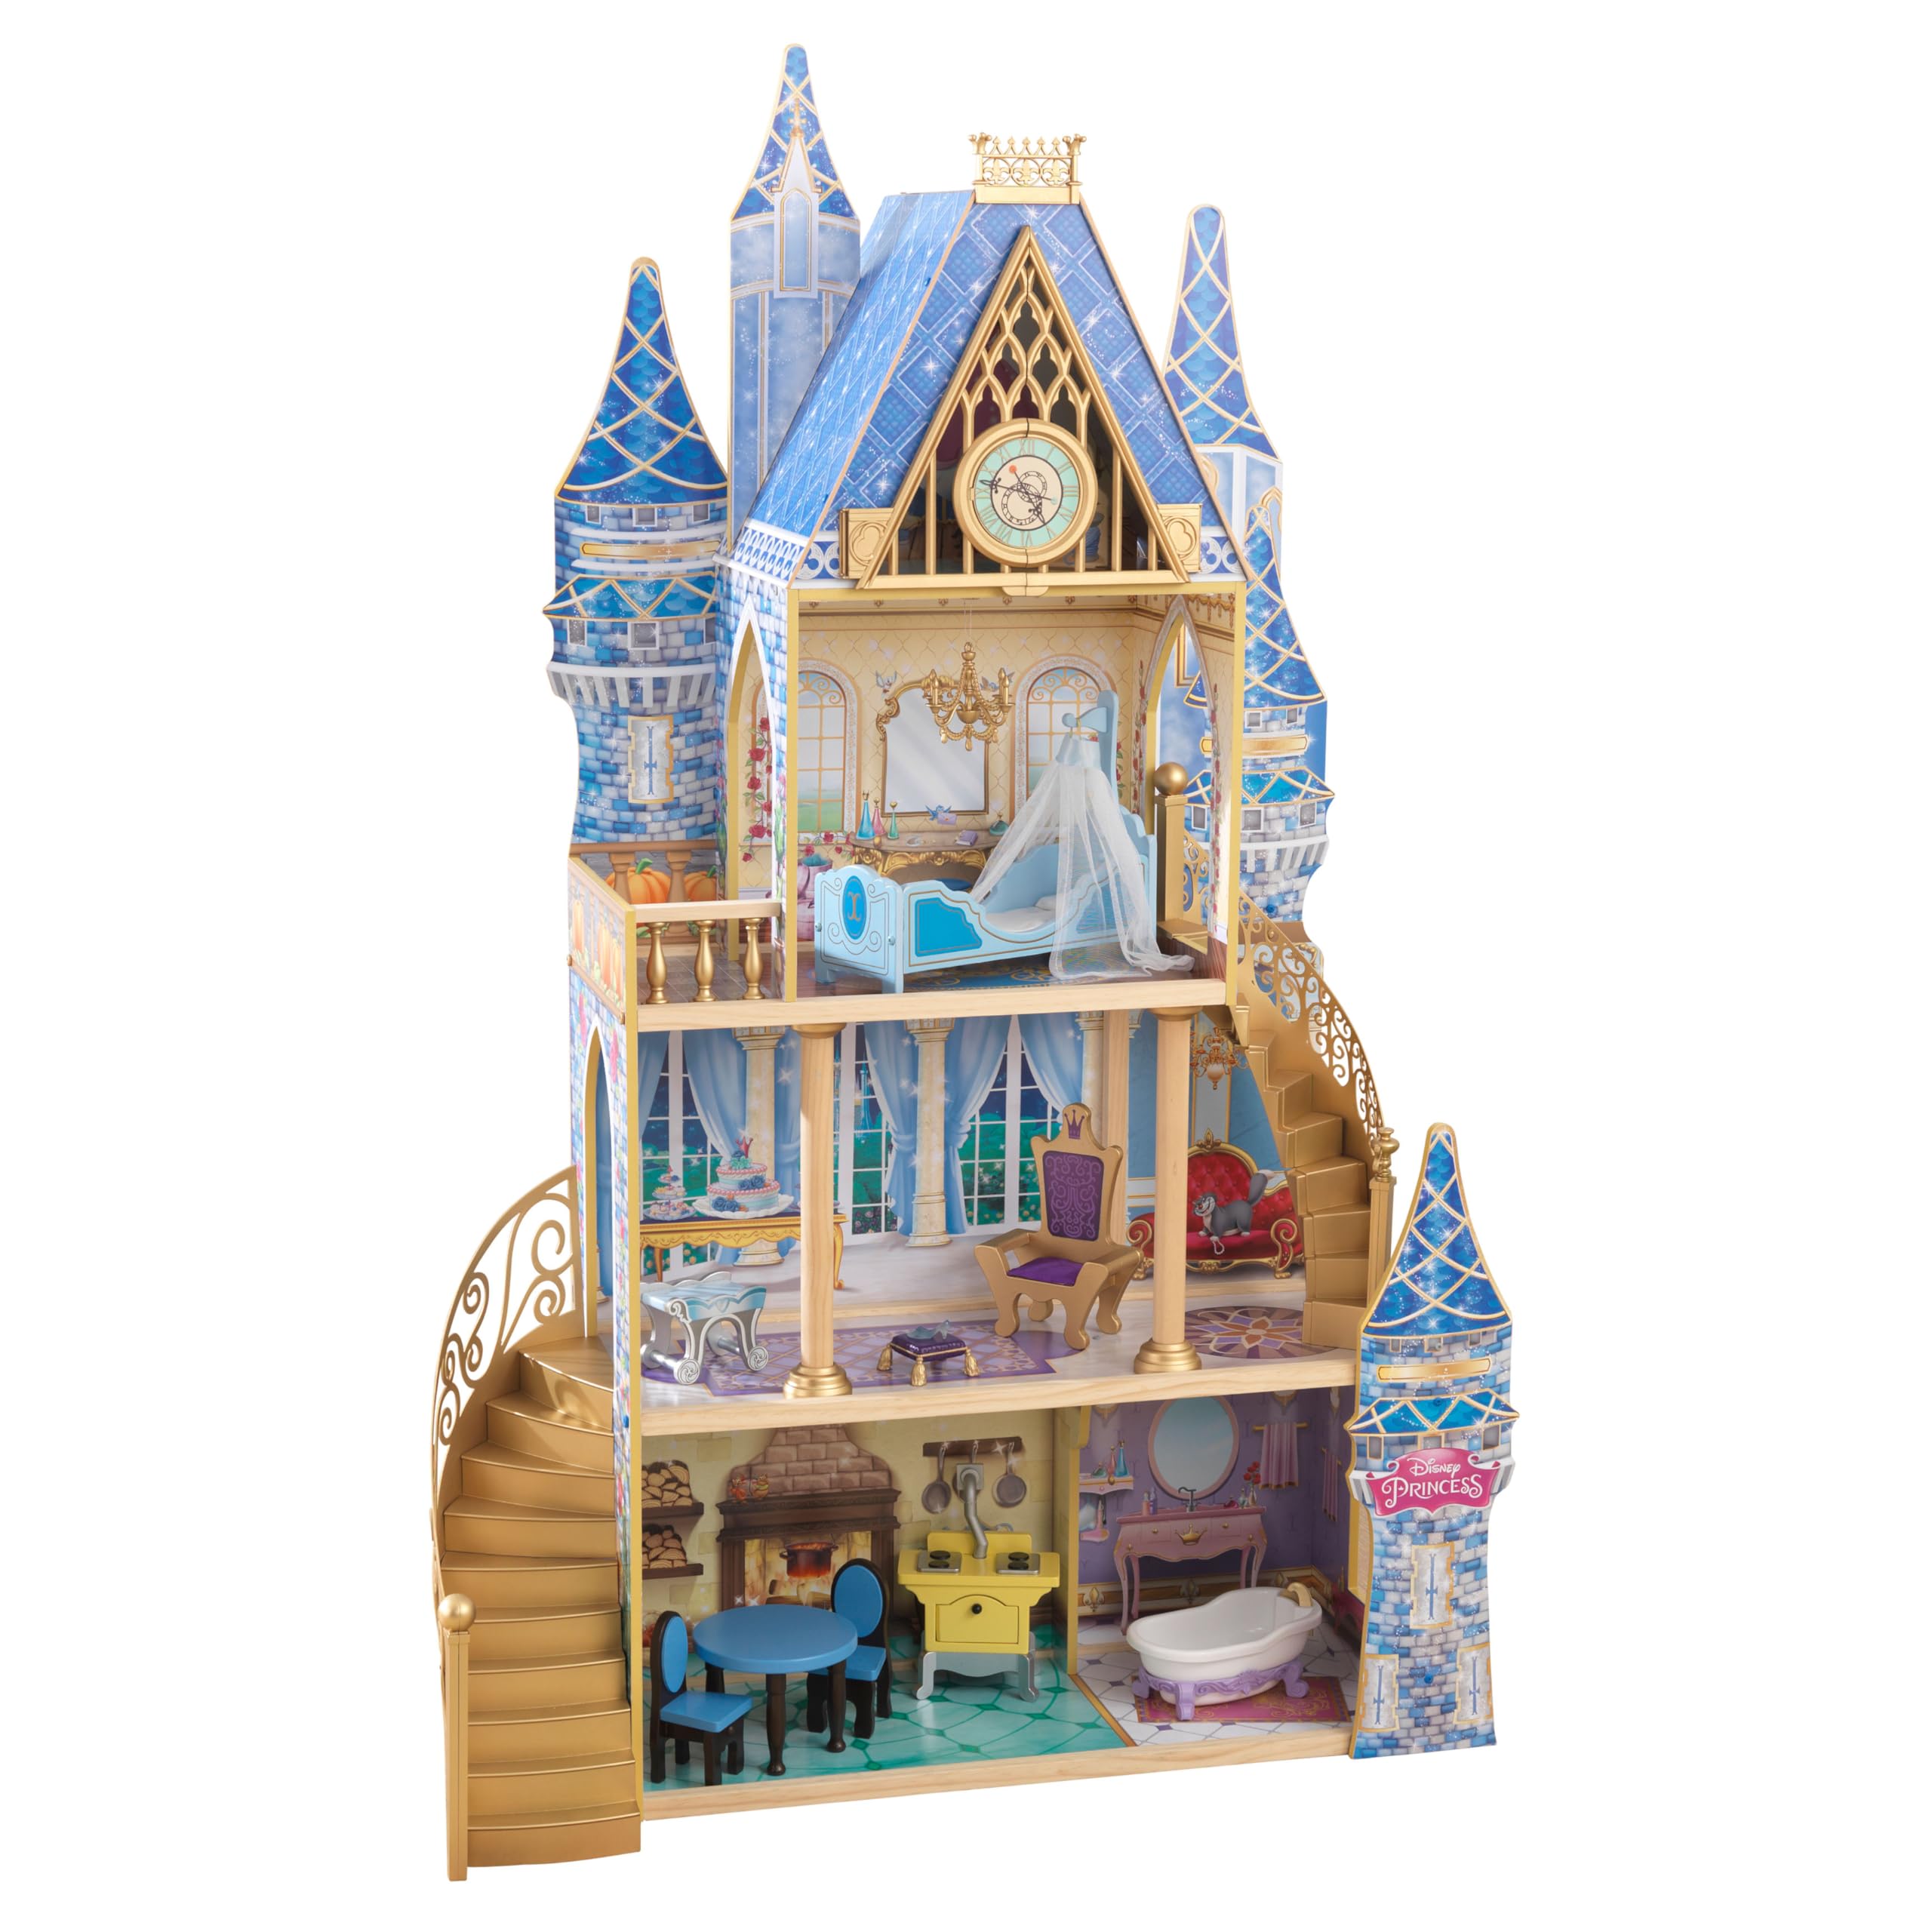 KidKraft Disney® Princess Cinderella Royal Dream Wooden Castle Dollhouse, Over 4 Feet Tall with 12 Pieces, Blue, Gift for Ages 3+